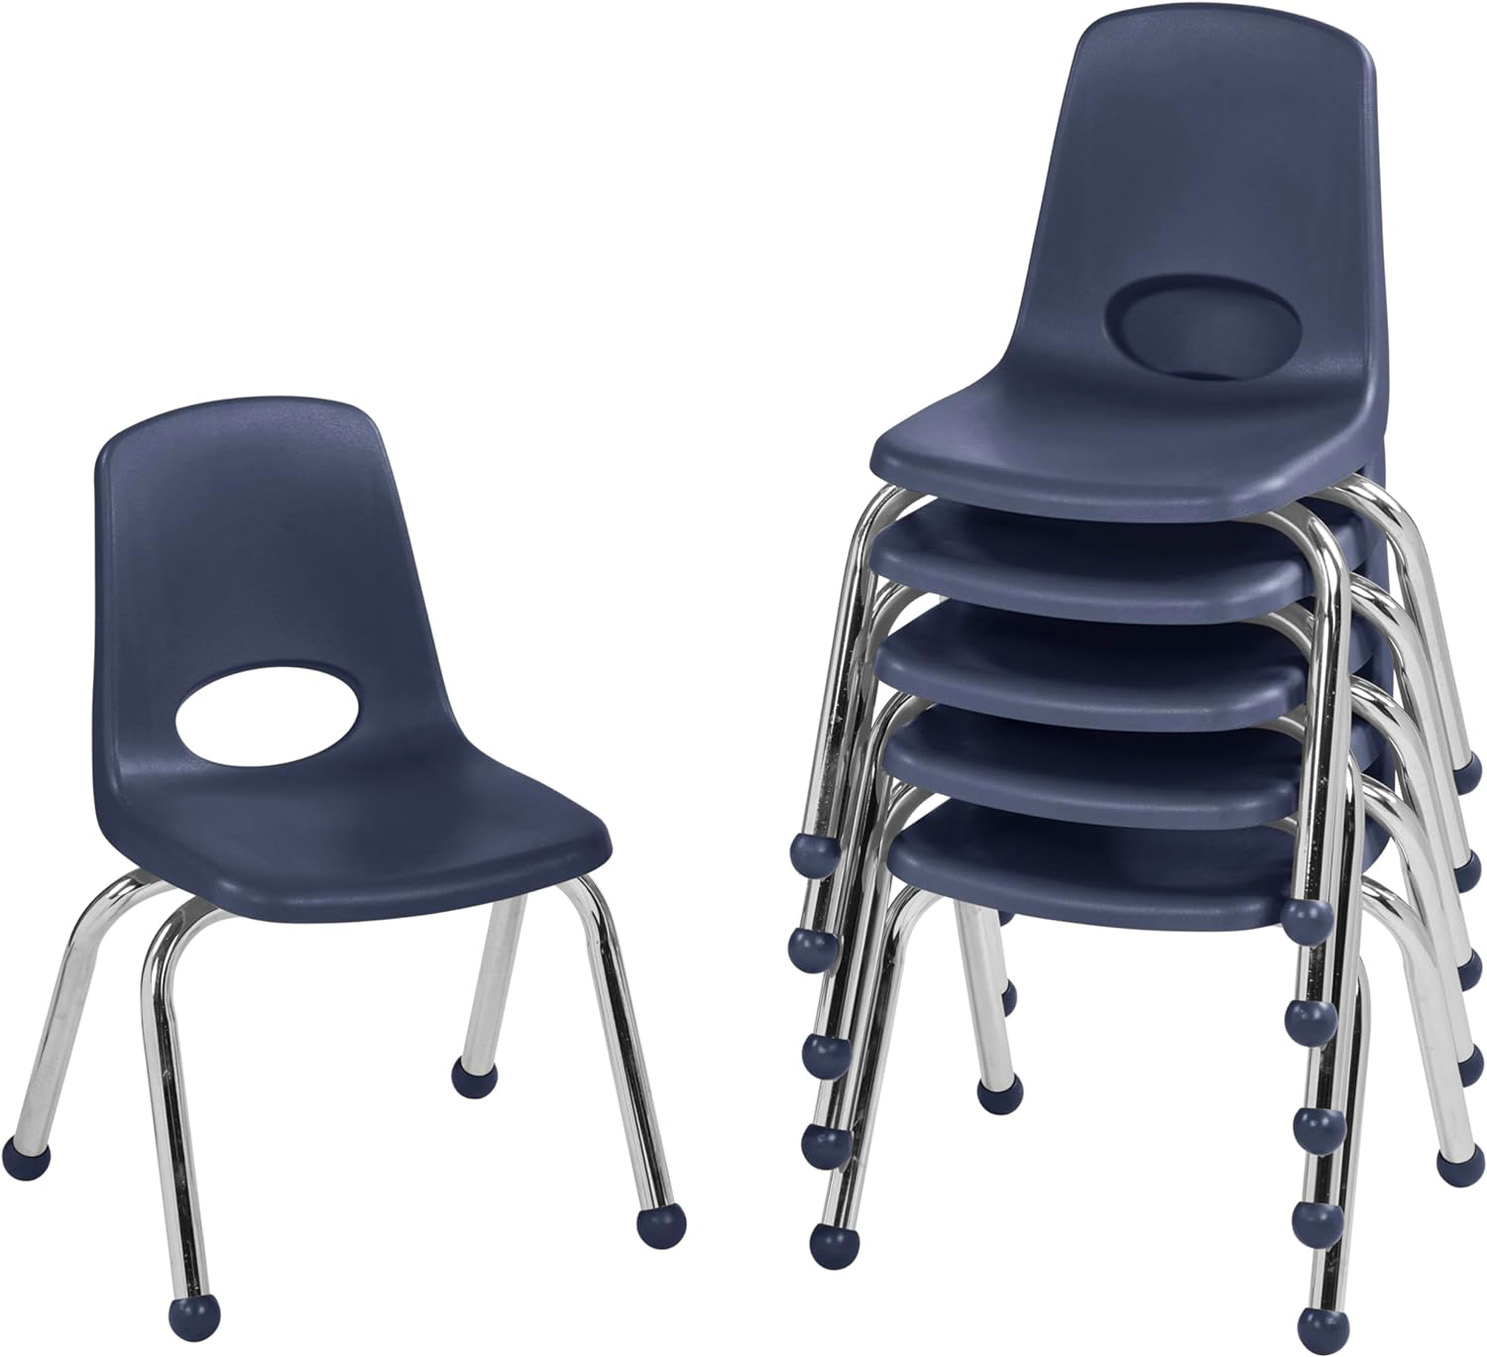 FDP 12″ School Stack Chair, Stacking Student Seat with Chromed Steel Legs and Ball Glides; for in-Home Learning or Classroom – Navy (6-Pack)